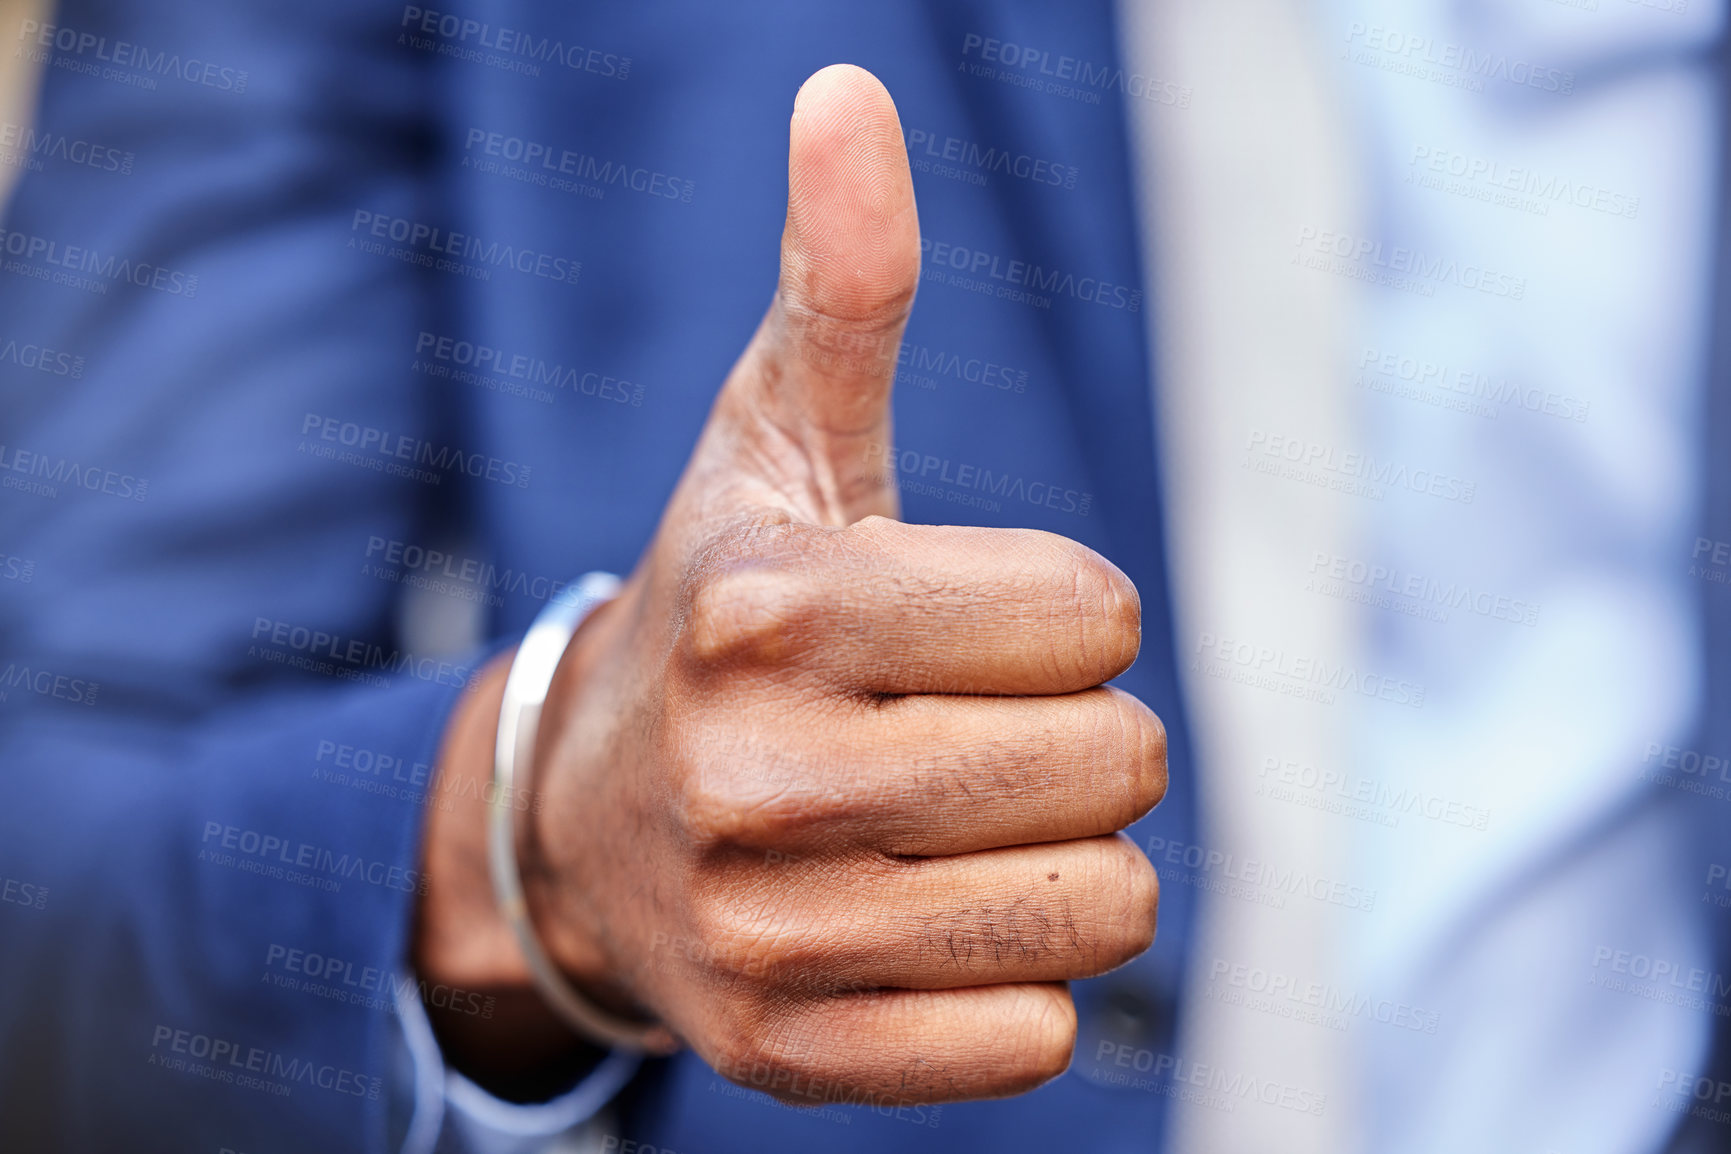 Buy stock photo Shot of an unrecognizable businessman showing thumbs up